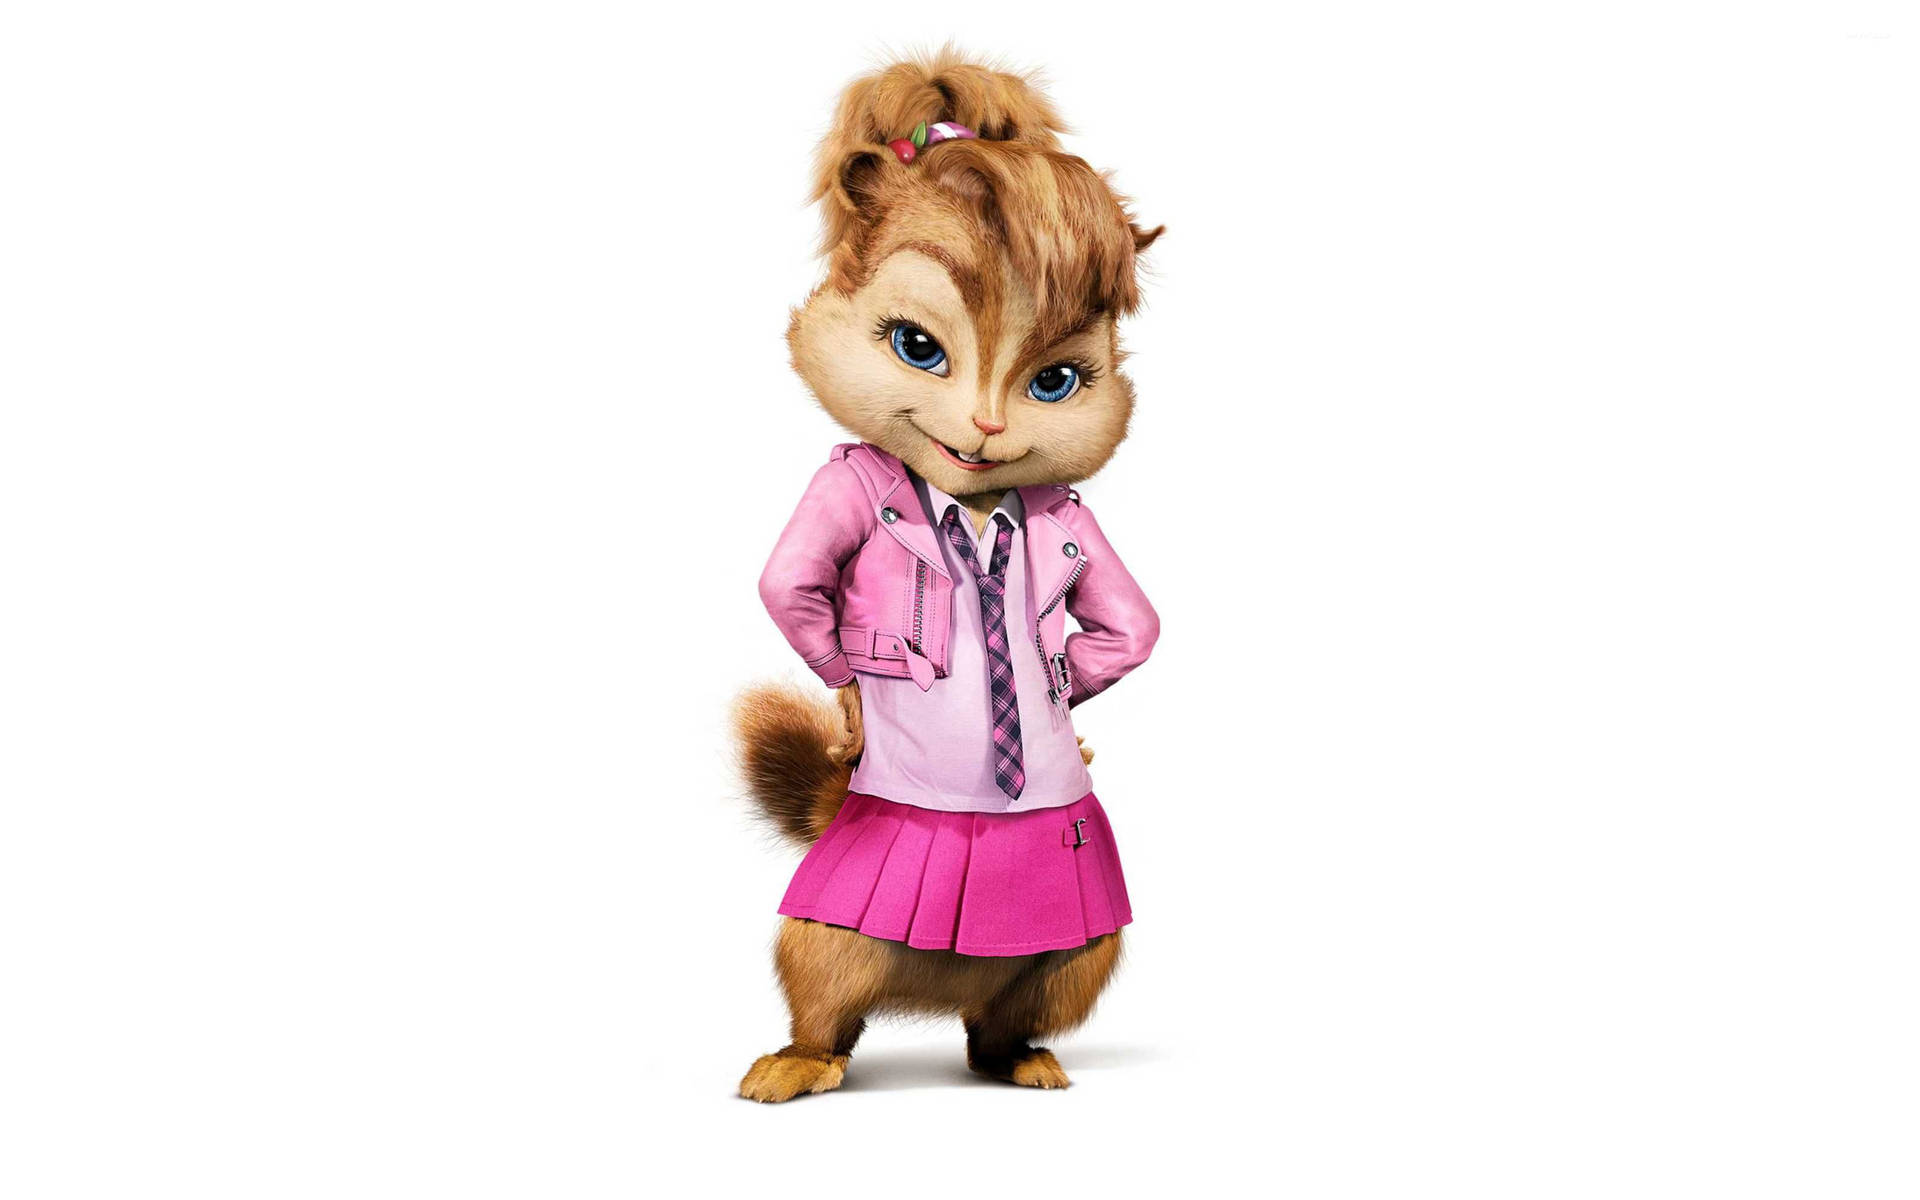 Alvin And The Chipmunks Brittany Miller Wallpaper